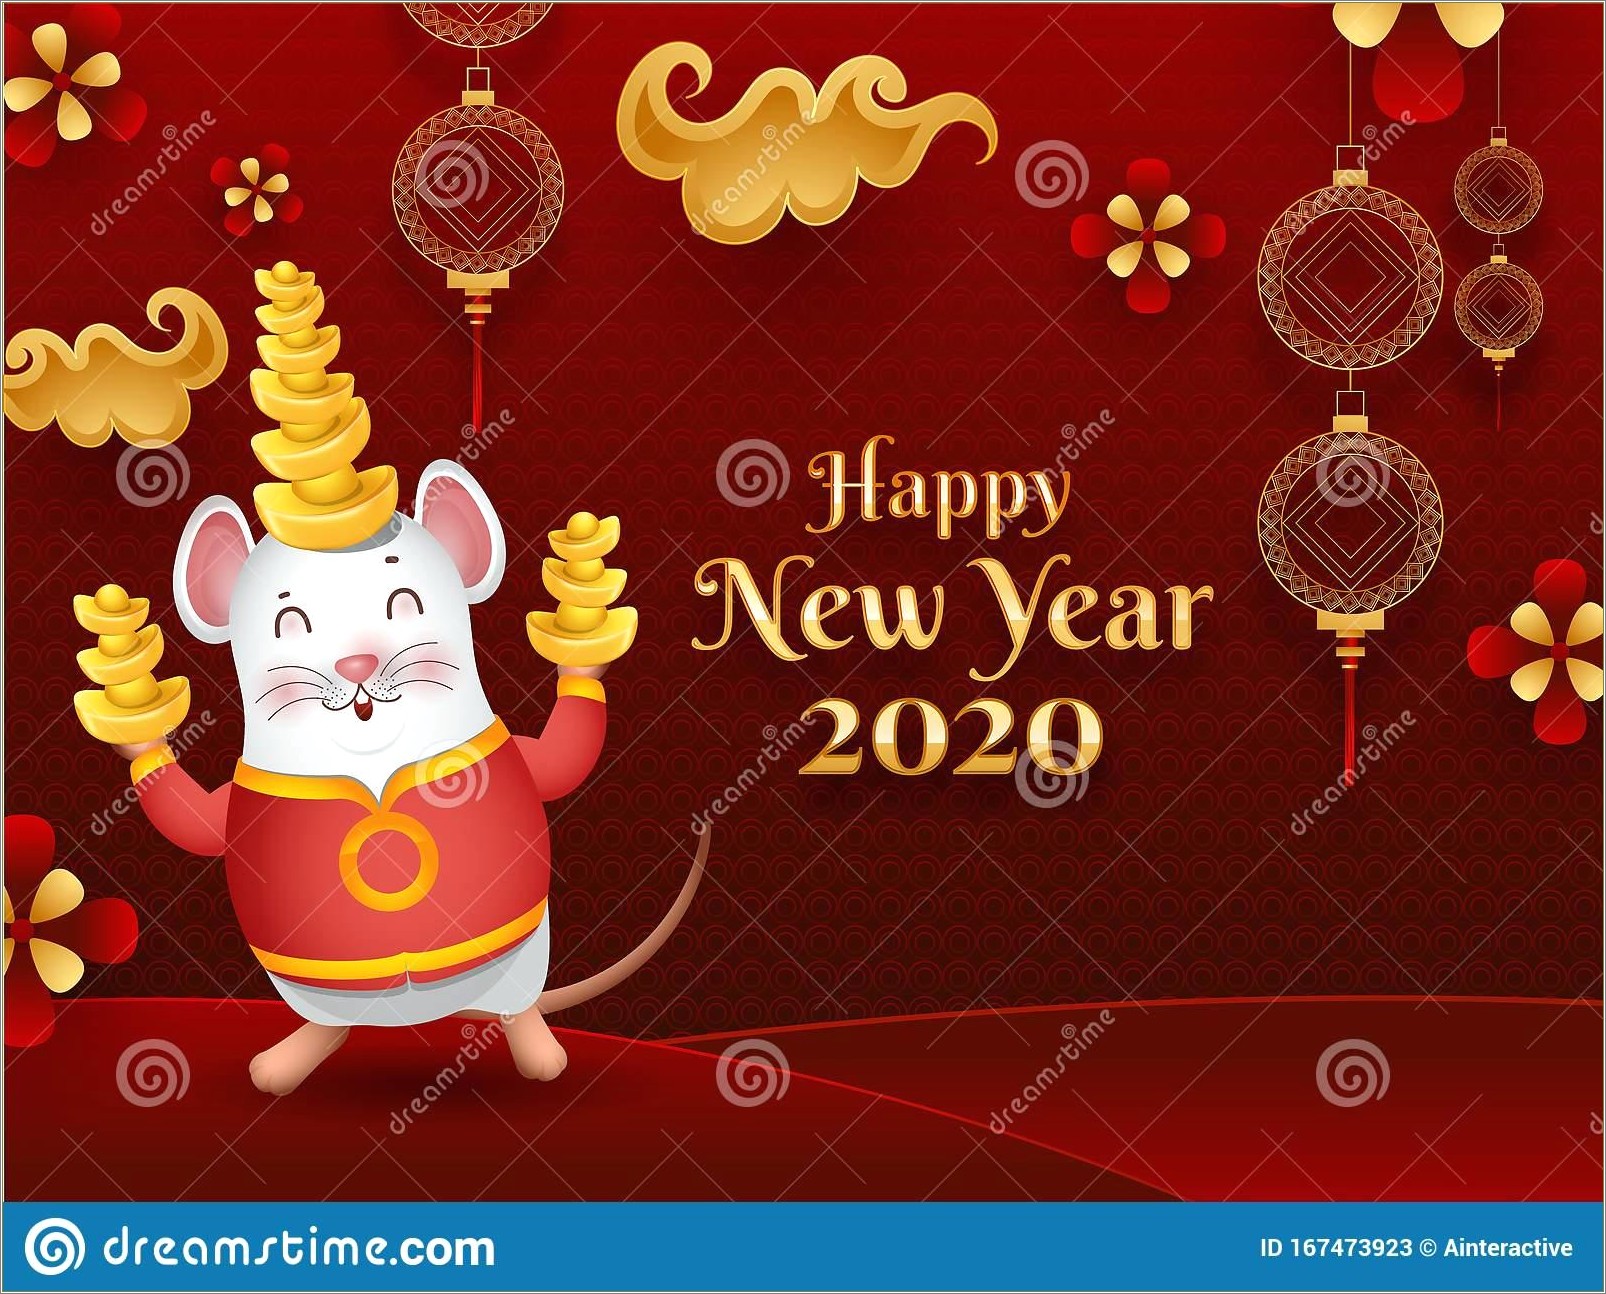 Happy New Year 2020 Template Free Greeting Card